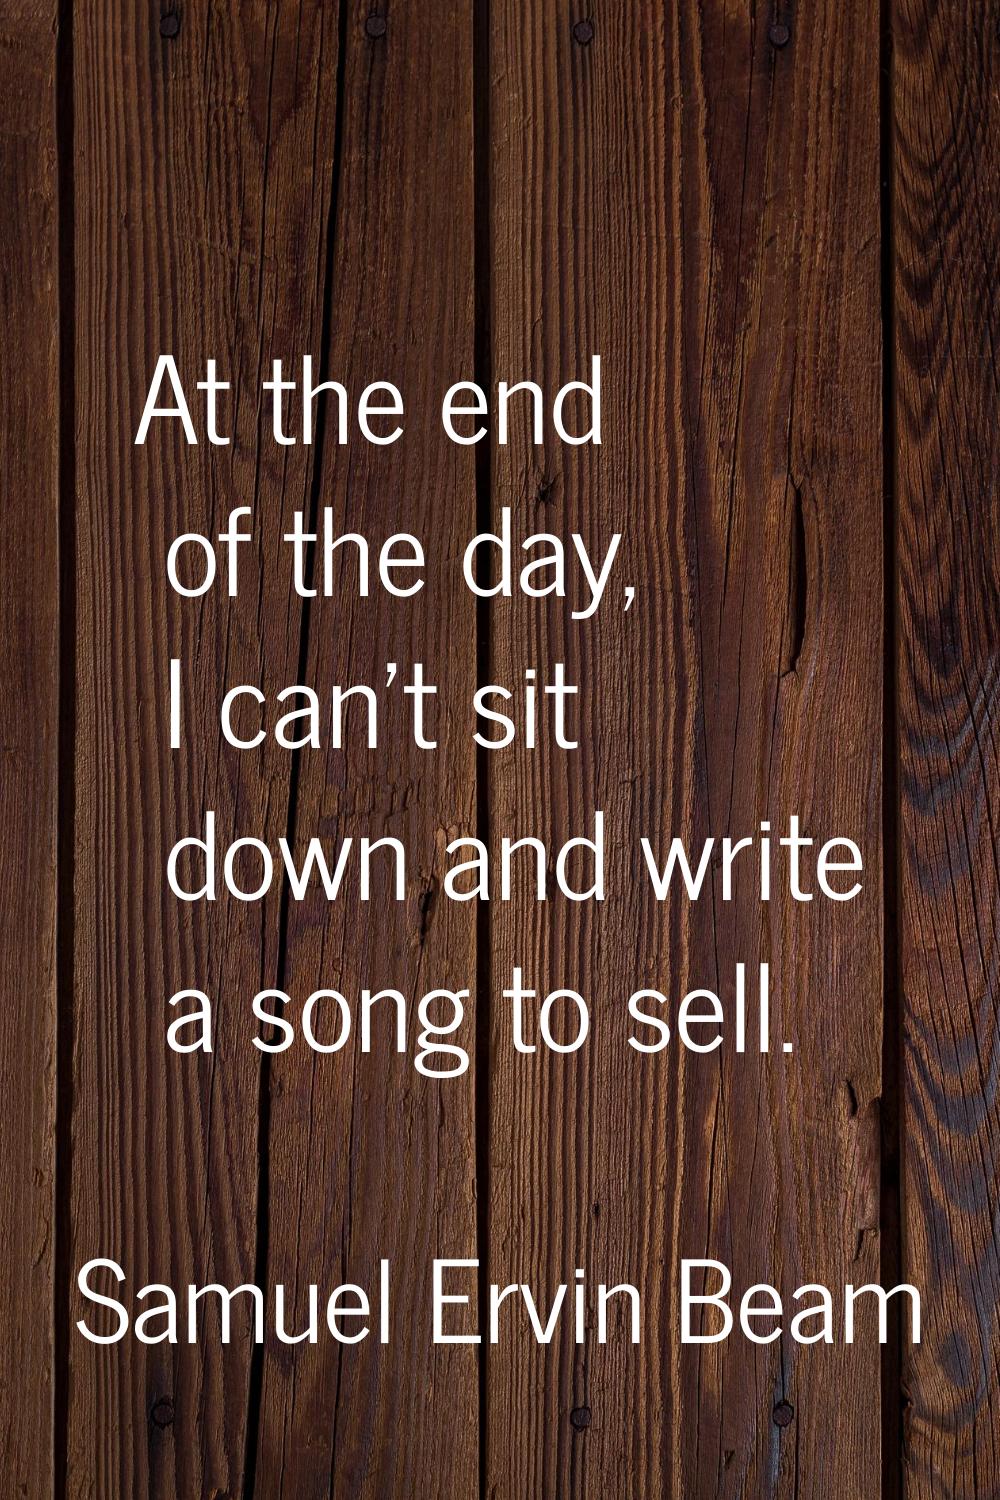 At the end of the day, I can't sit down and write a song to sell.